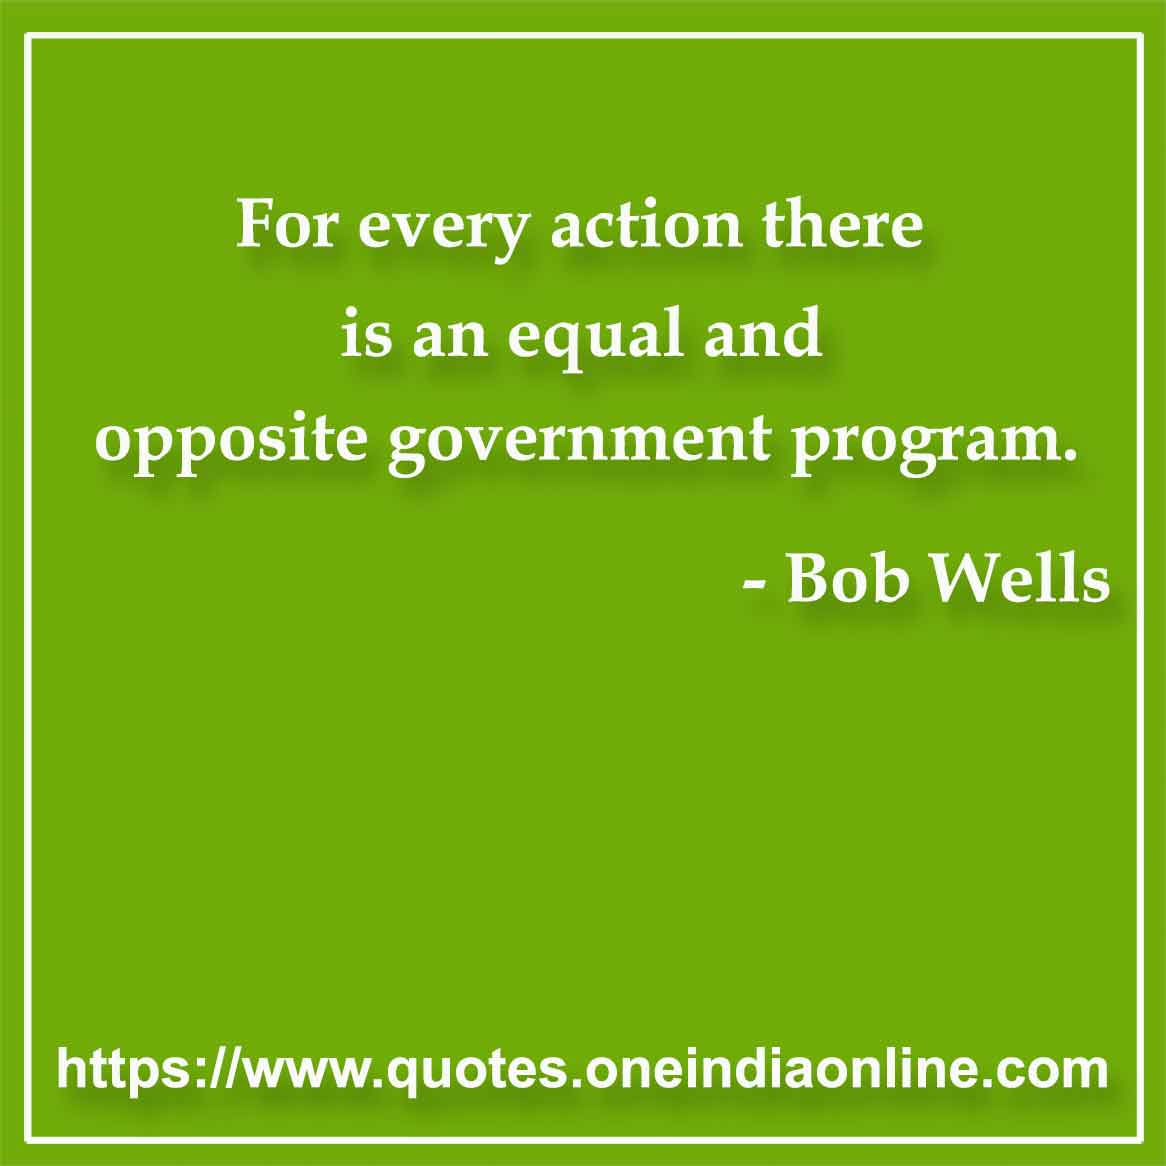 For every action there is an equal and opposite government program. 

- Government Quotes by Bob Wells